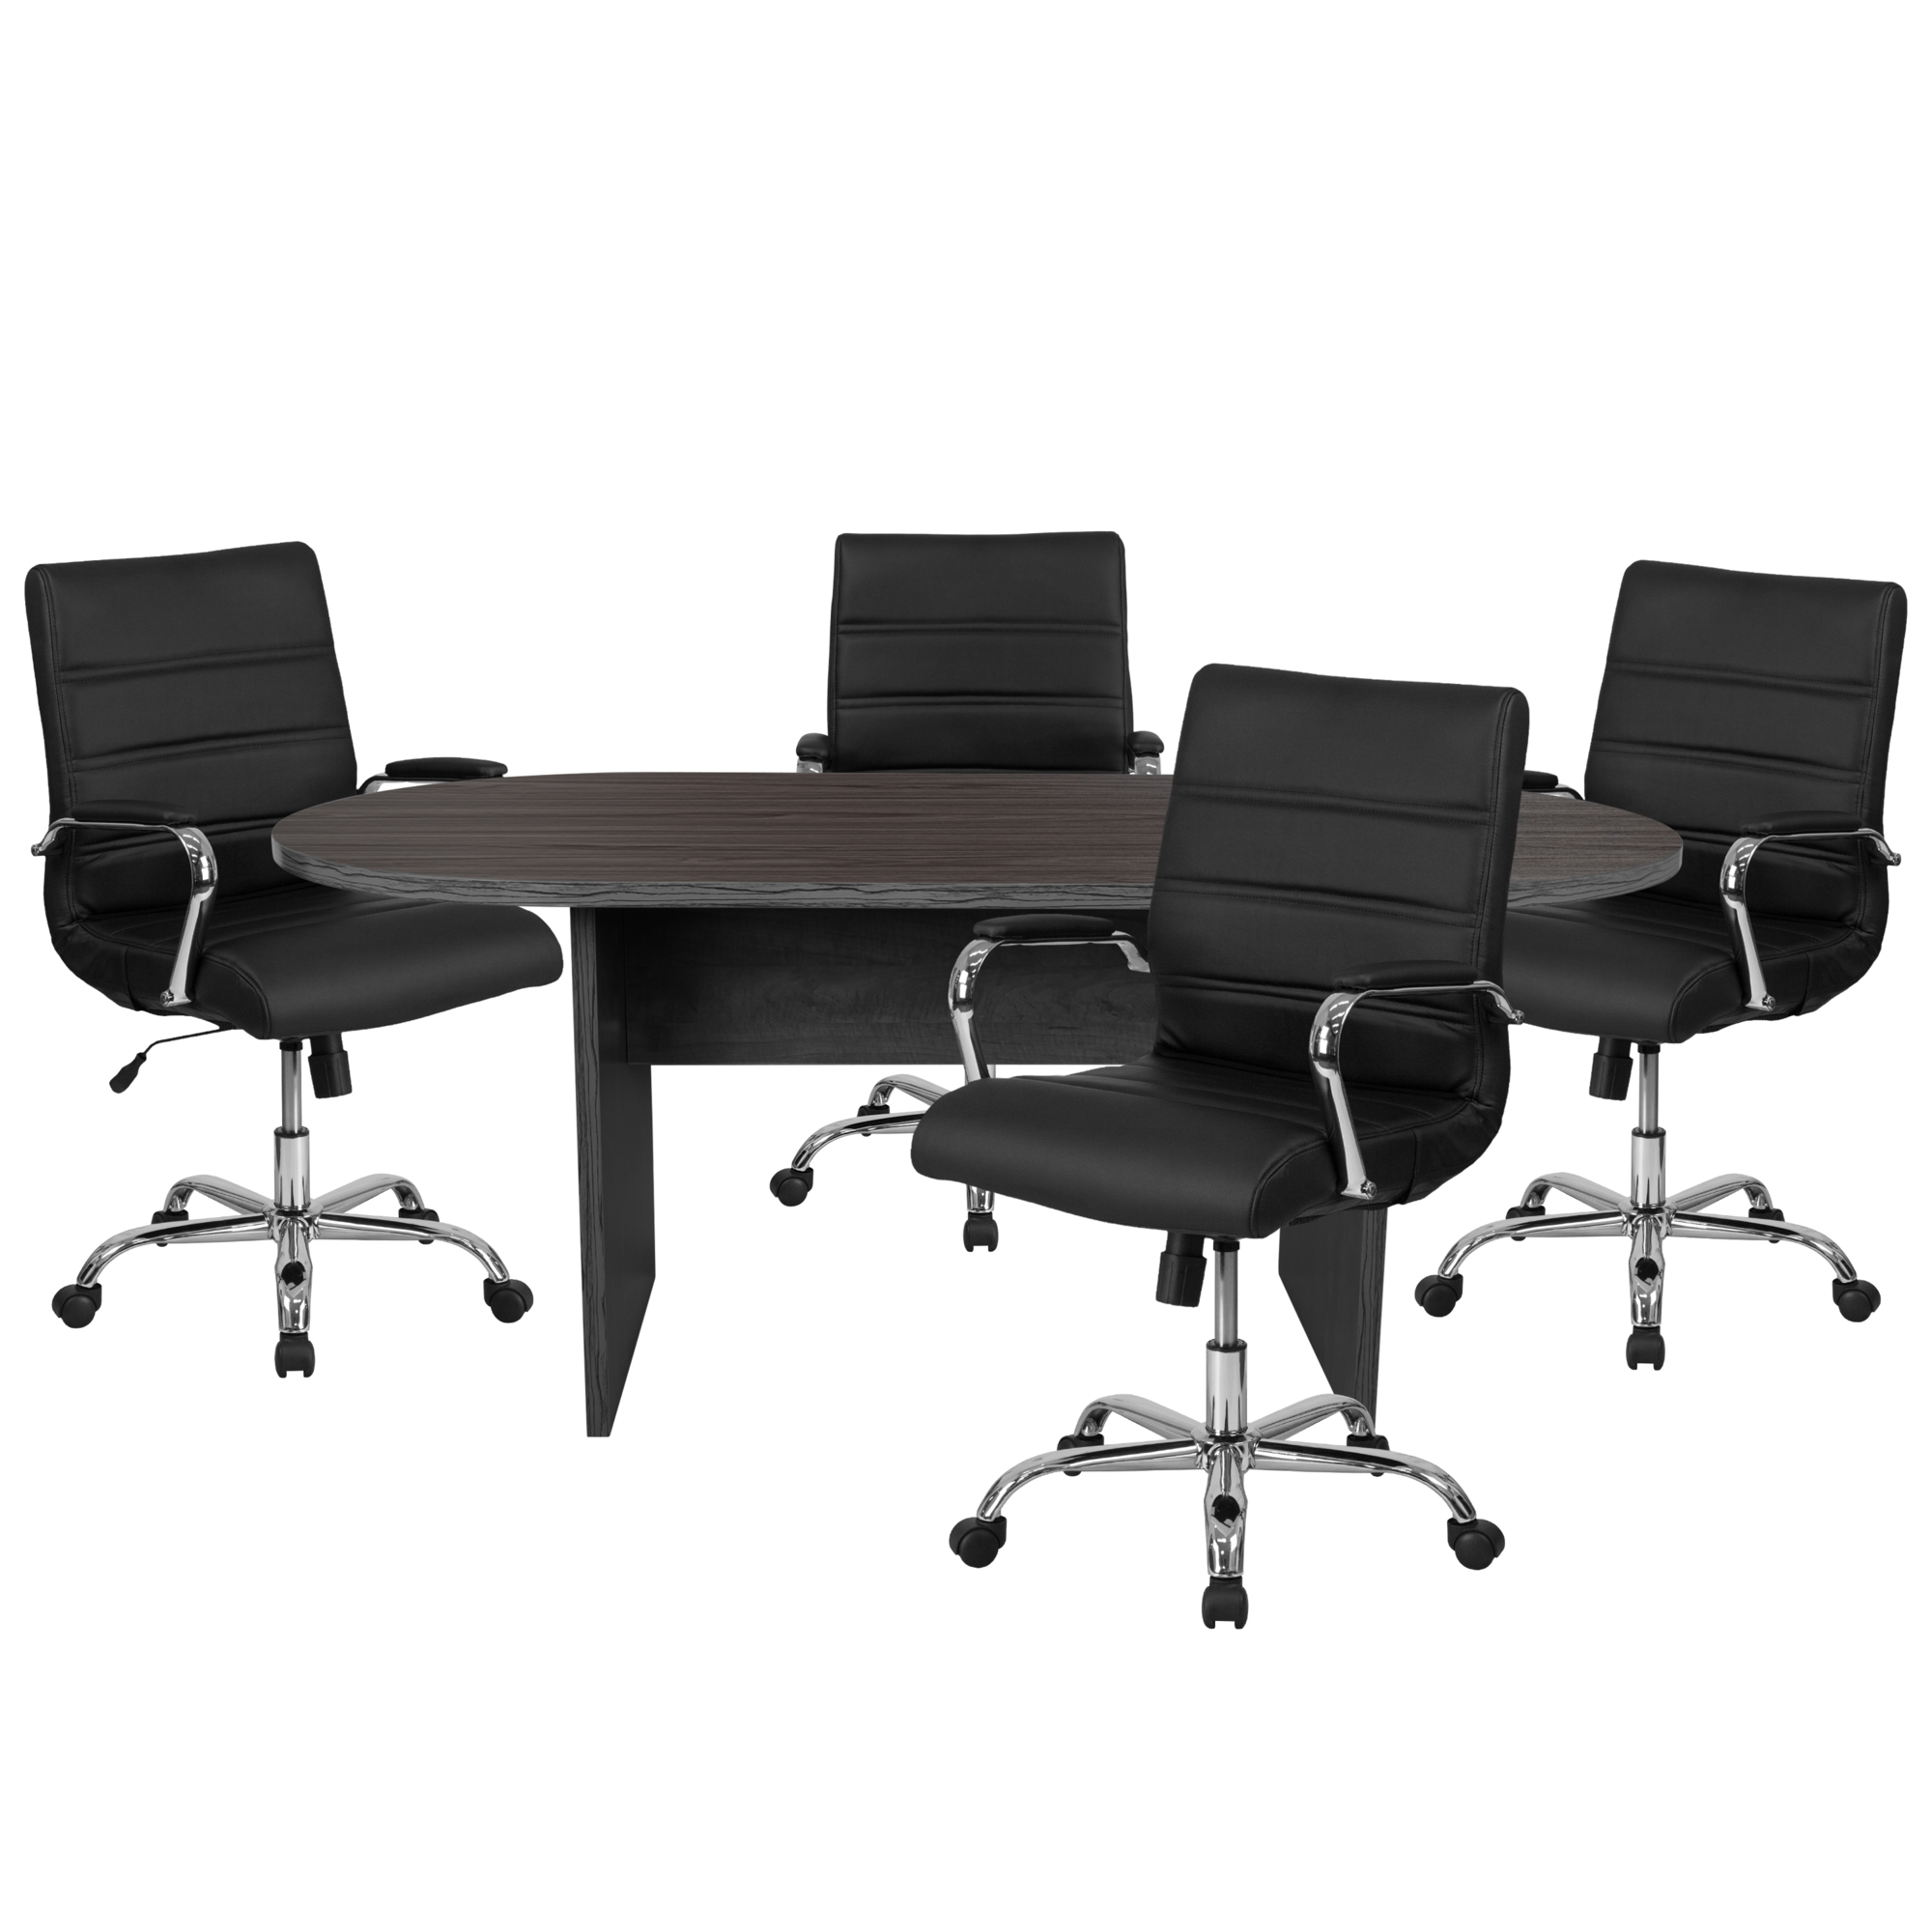 Flash Furniture, 5PC Gray Oval Conference Table Set with 4 Chairs, Height 29.5 in, Width 35 in, Length 72 in, Model BLN6GCGRY2286BK